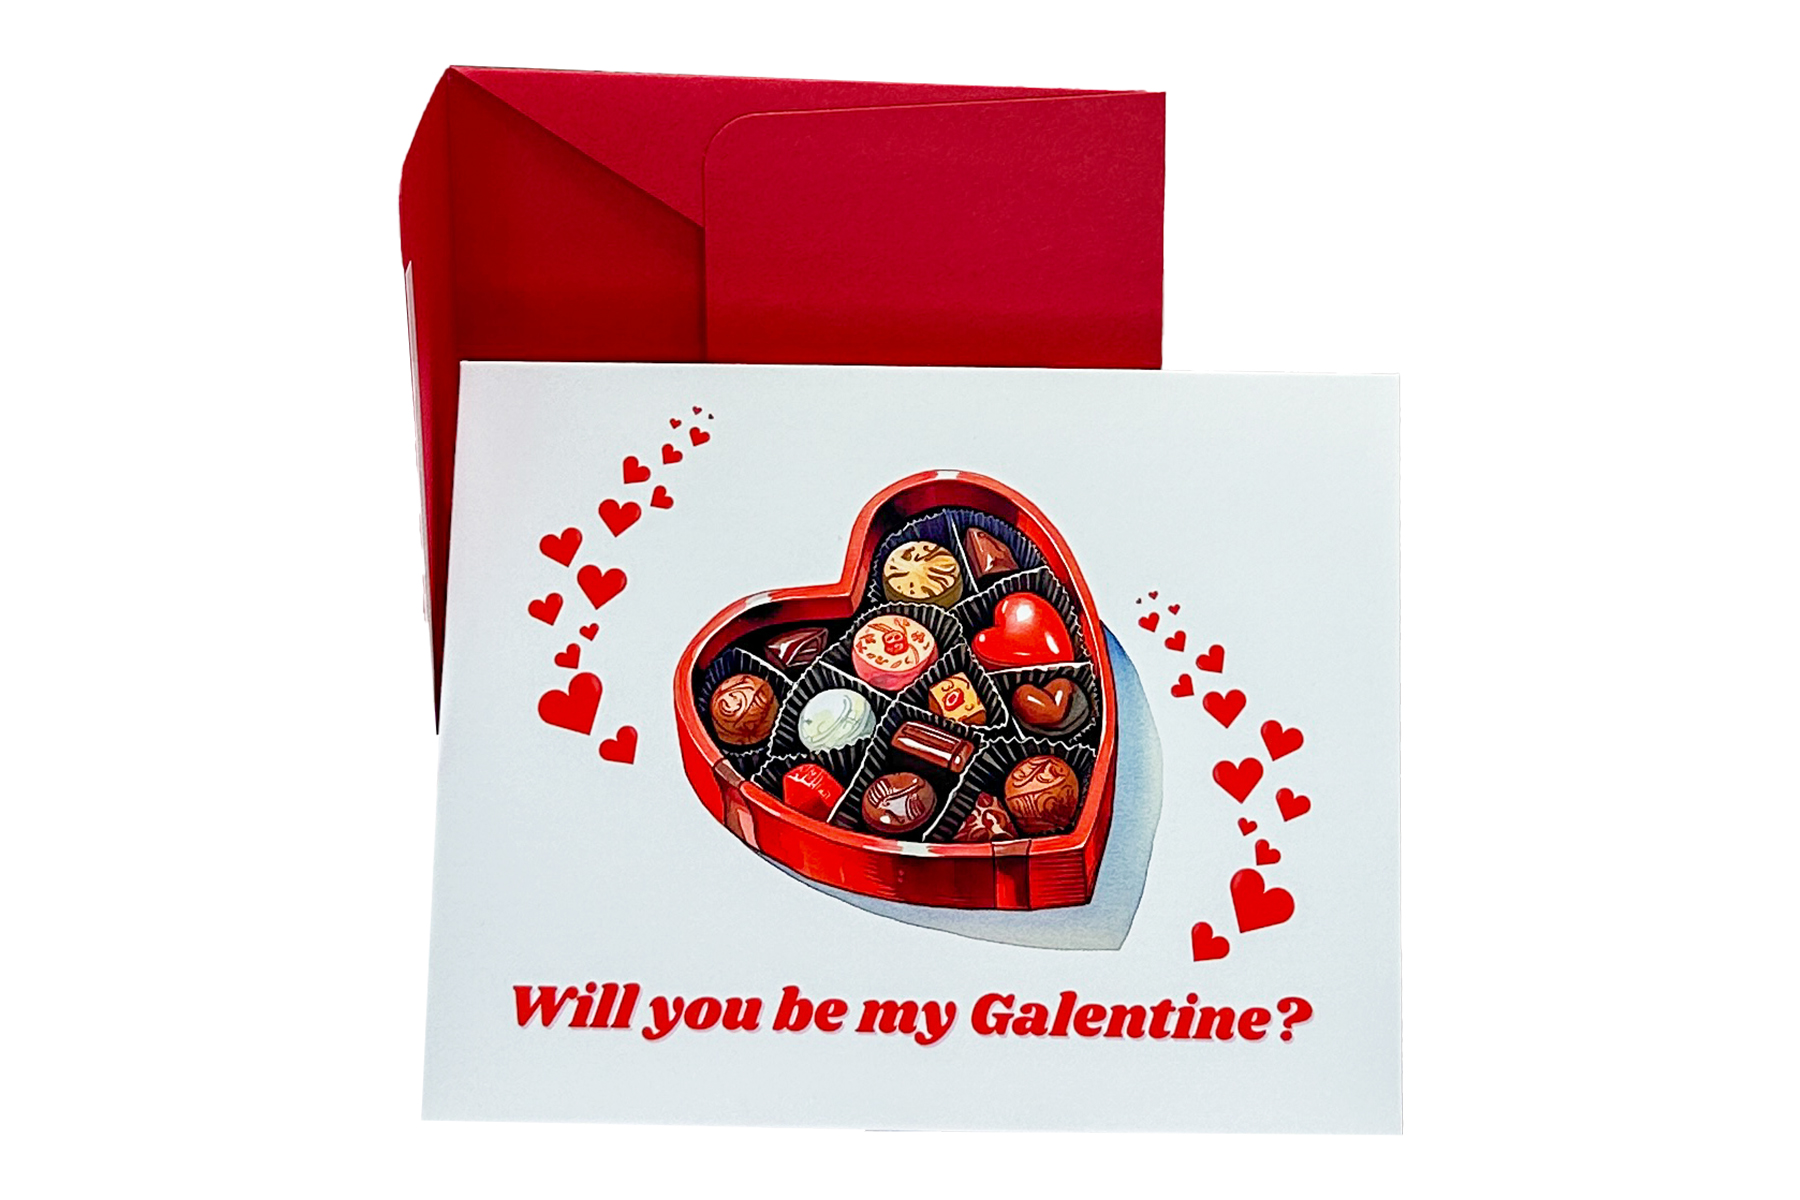 Will You Be My Galentine?, Etsy 